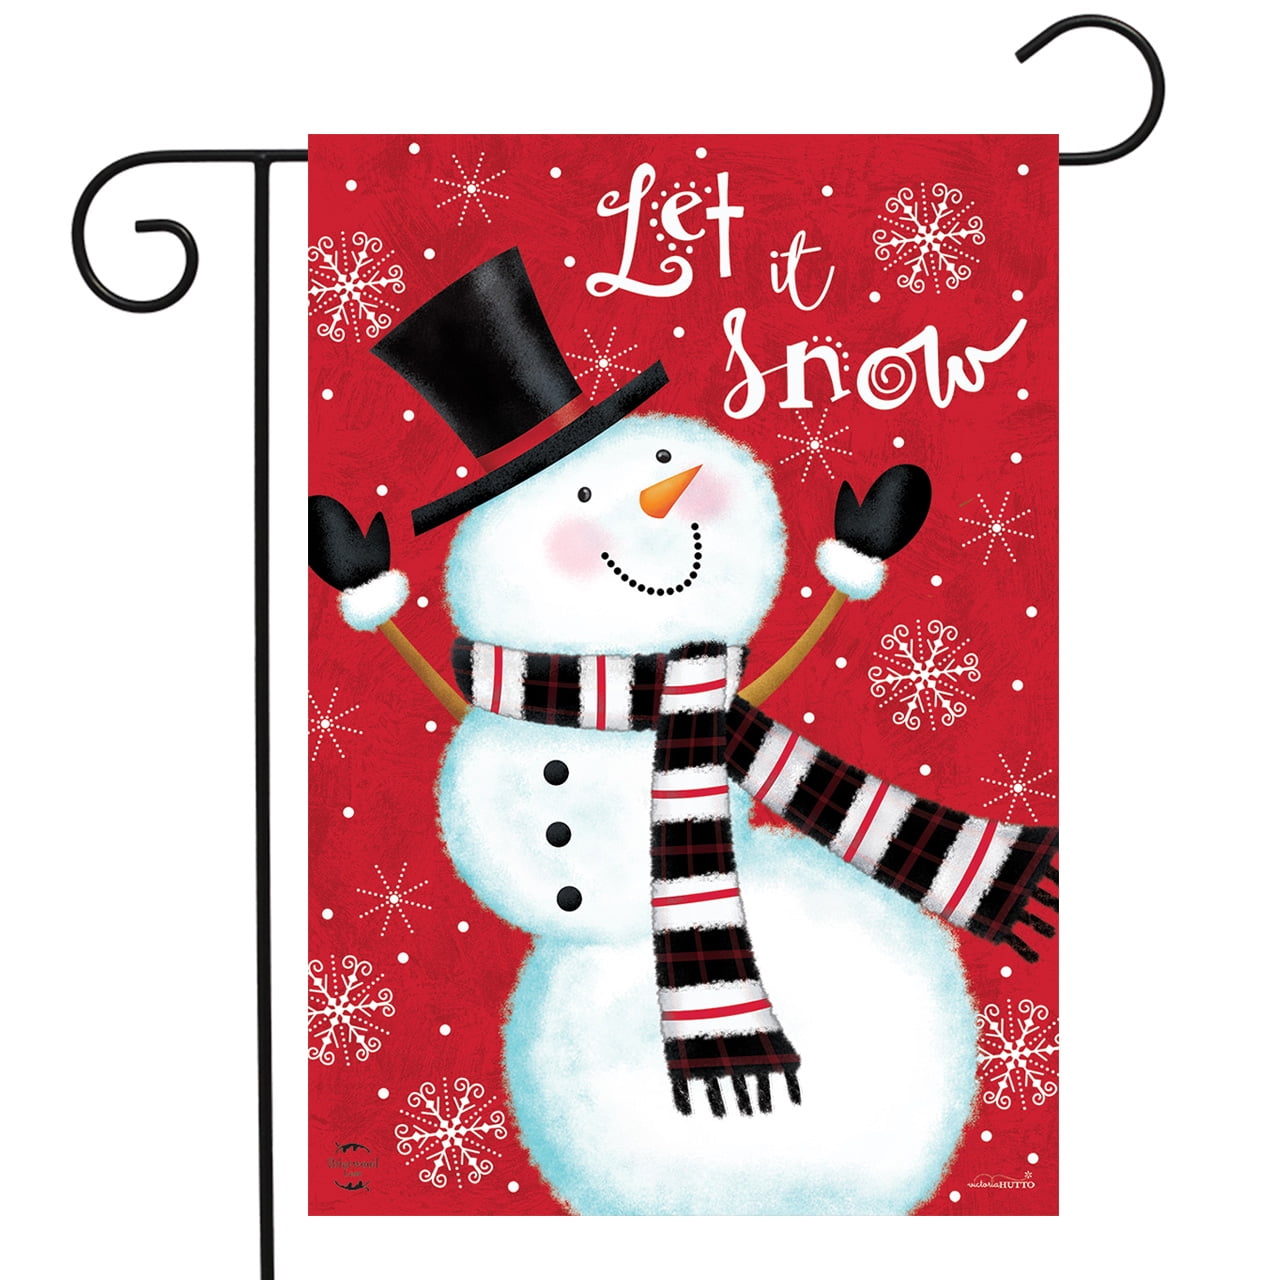 Winter Holiday Christmas Garden Flag Double Sided Snowman with Buffalo Plaid Scarf Yard Outdoor Decoration 12.5 x 18 Inch